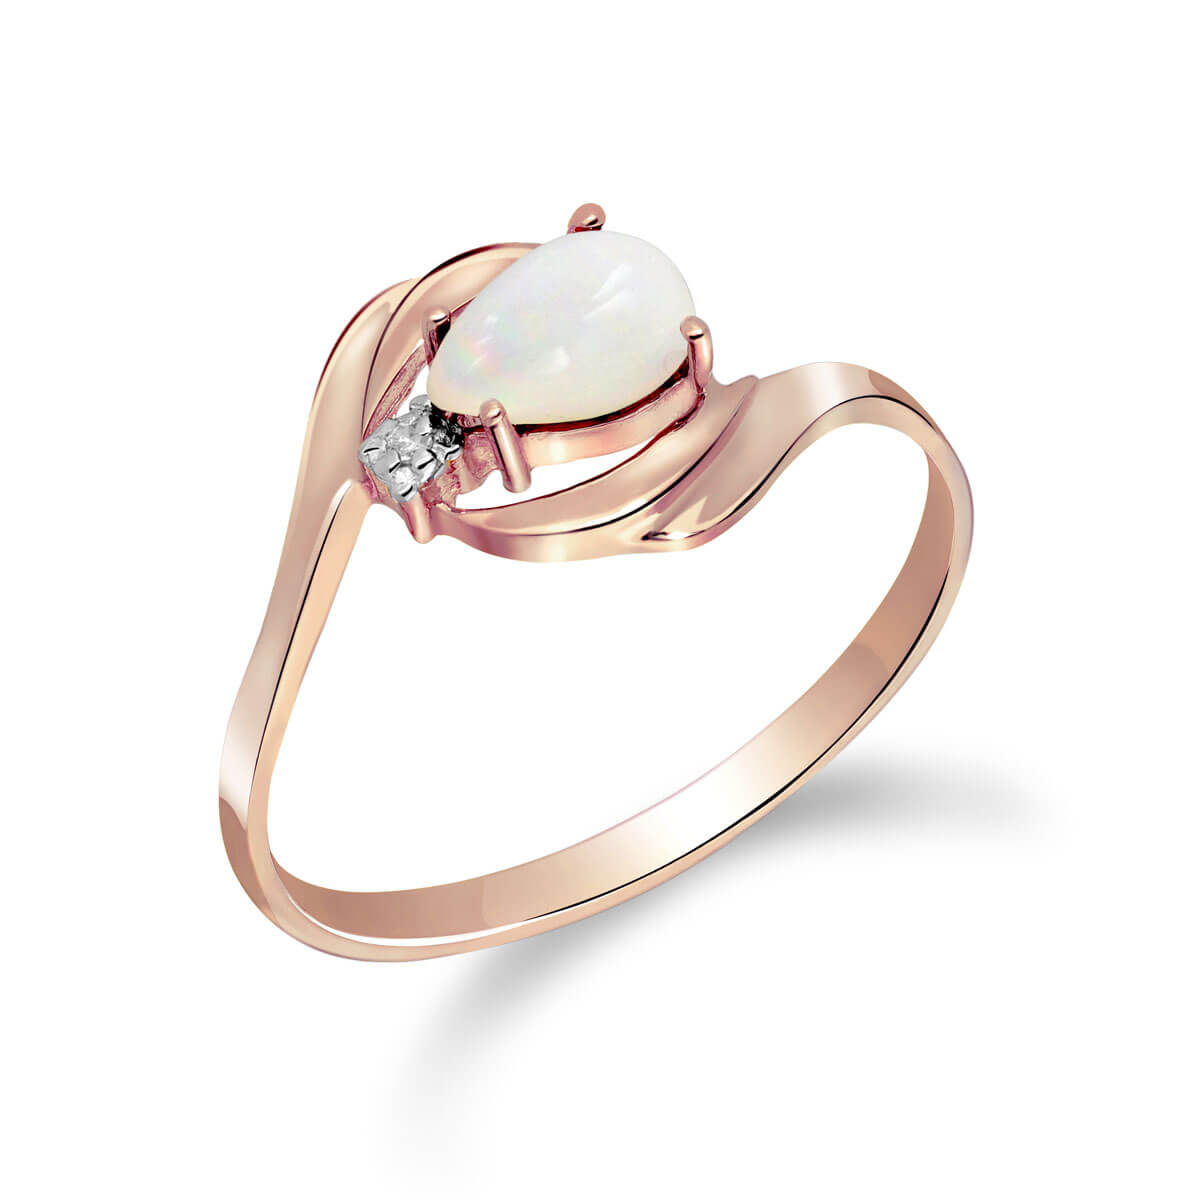 Opal & Diamond Flare Ring in 9ct Rose Gold